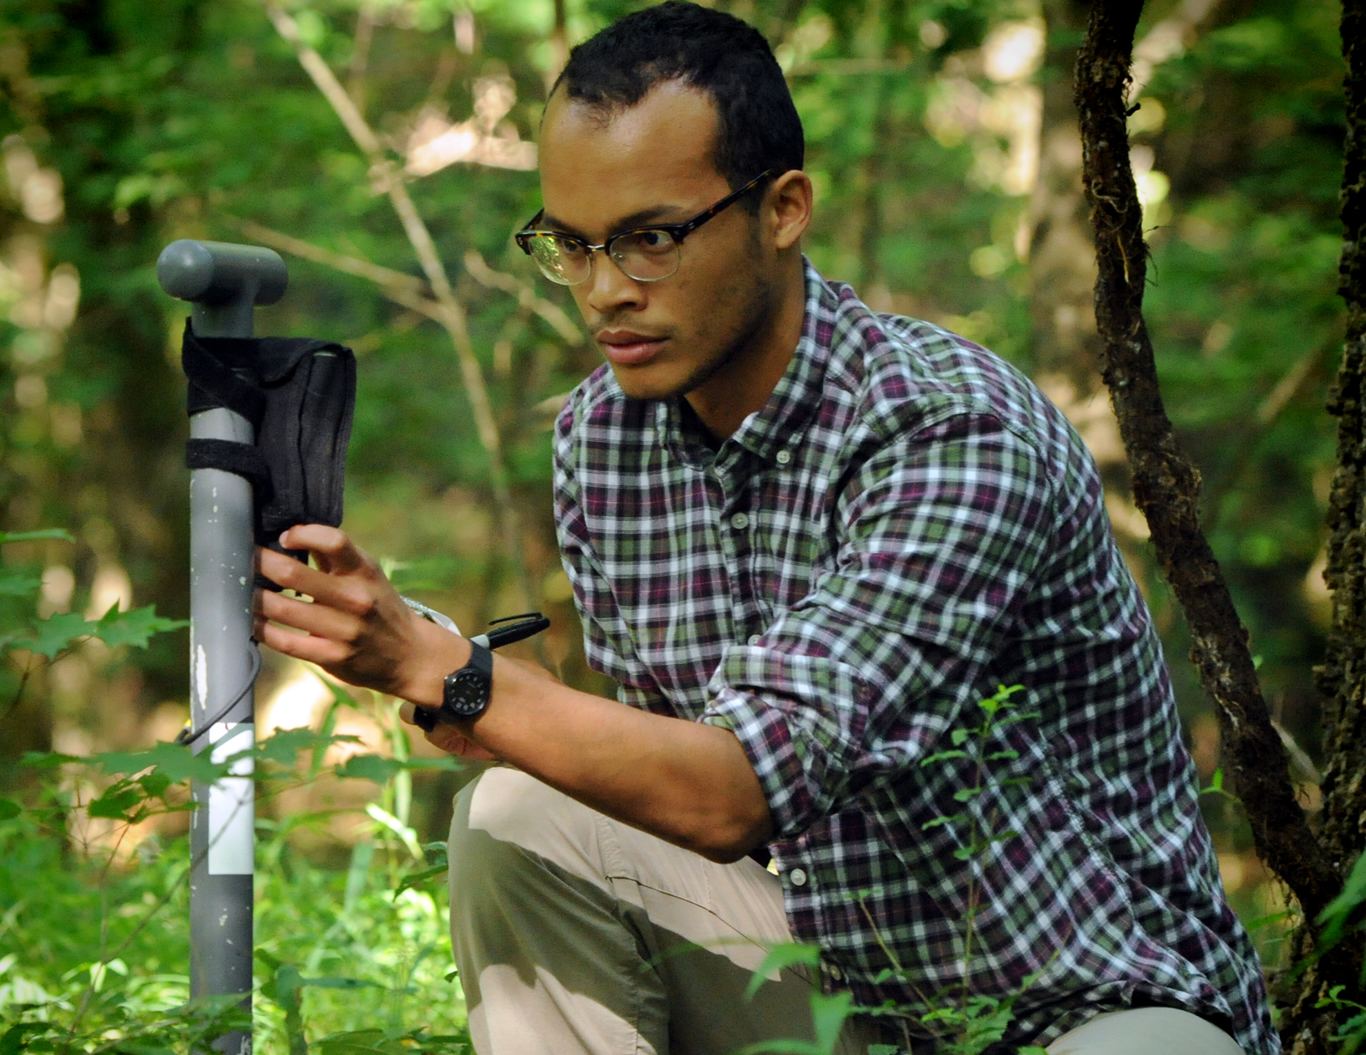 A researcher looks at a meter on a metal pole, outside in the woods.